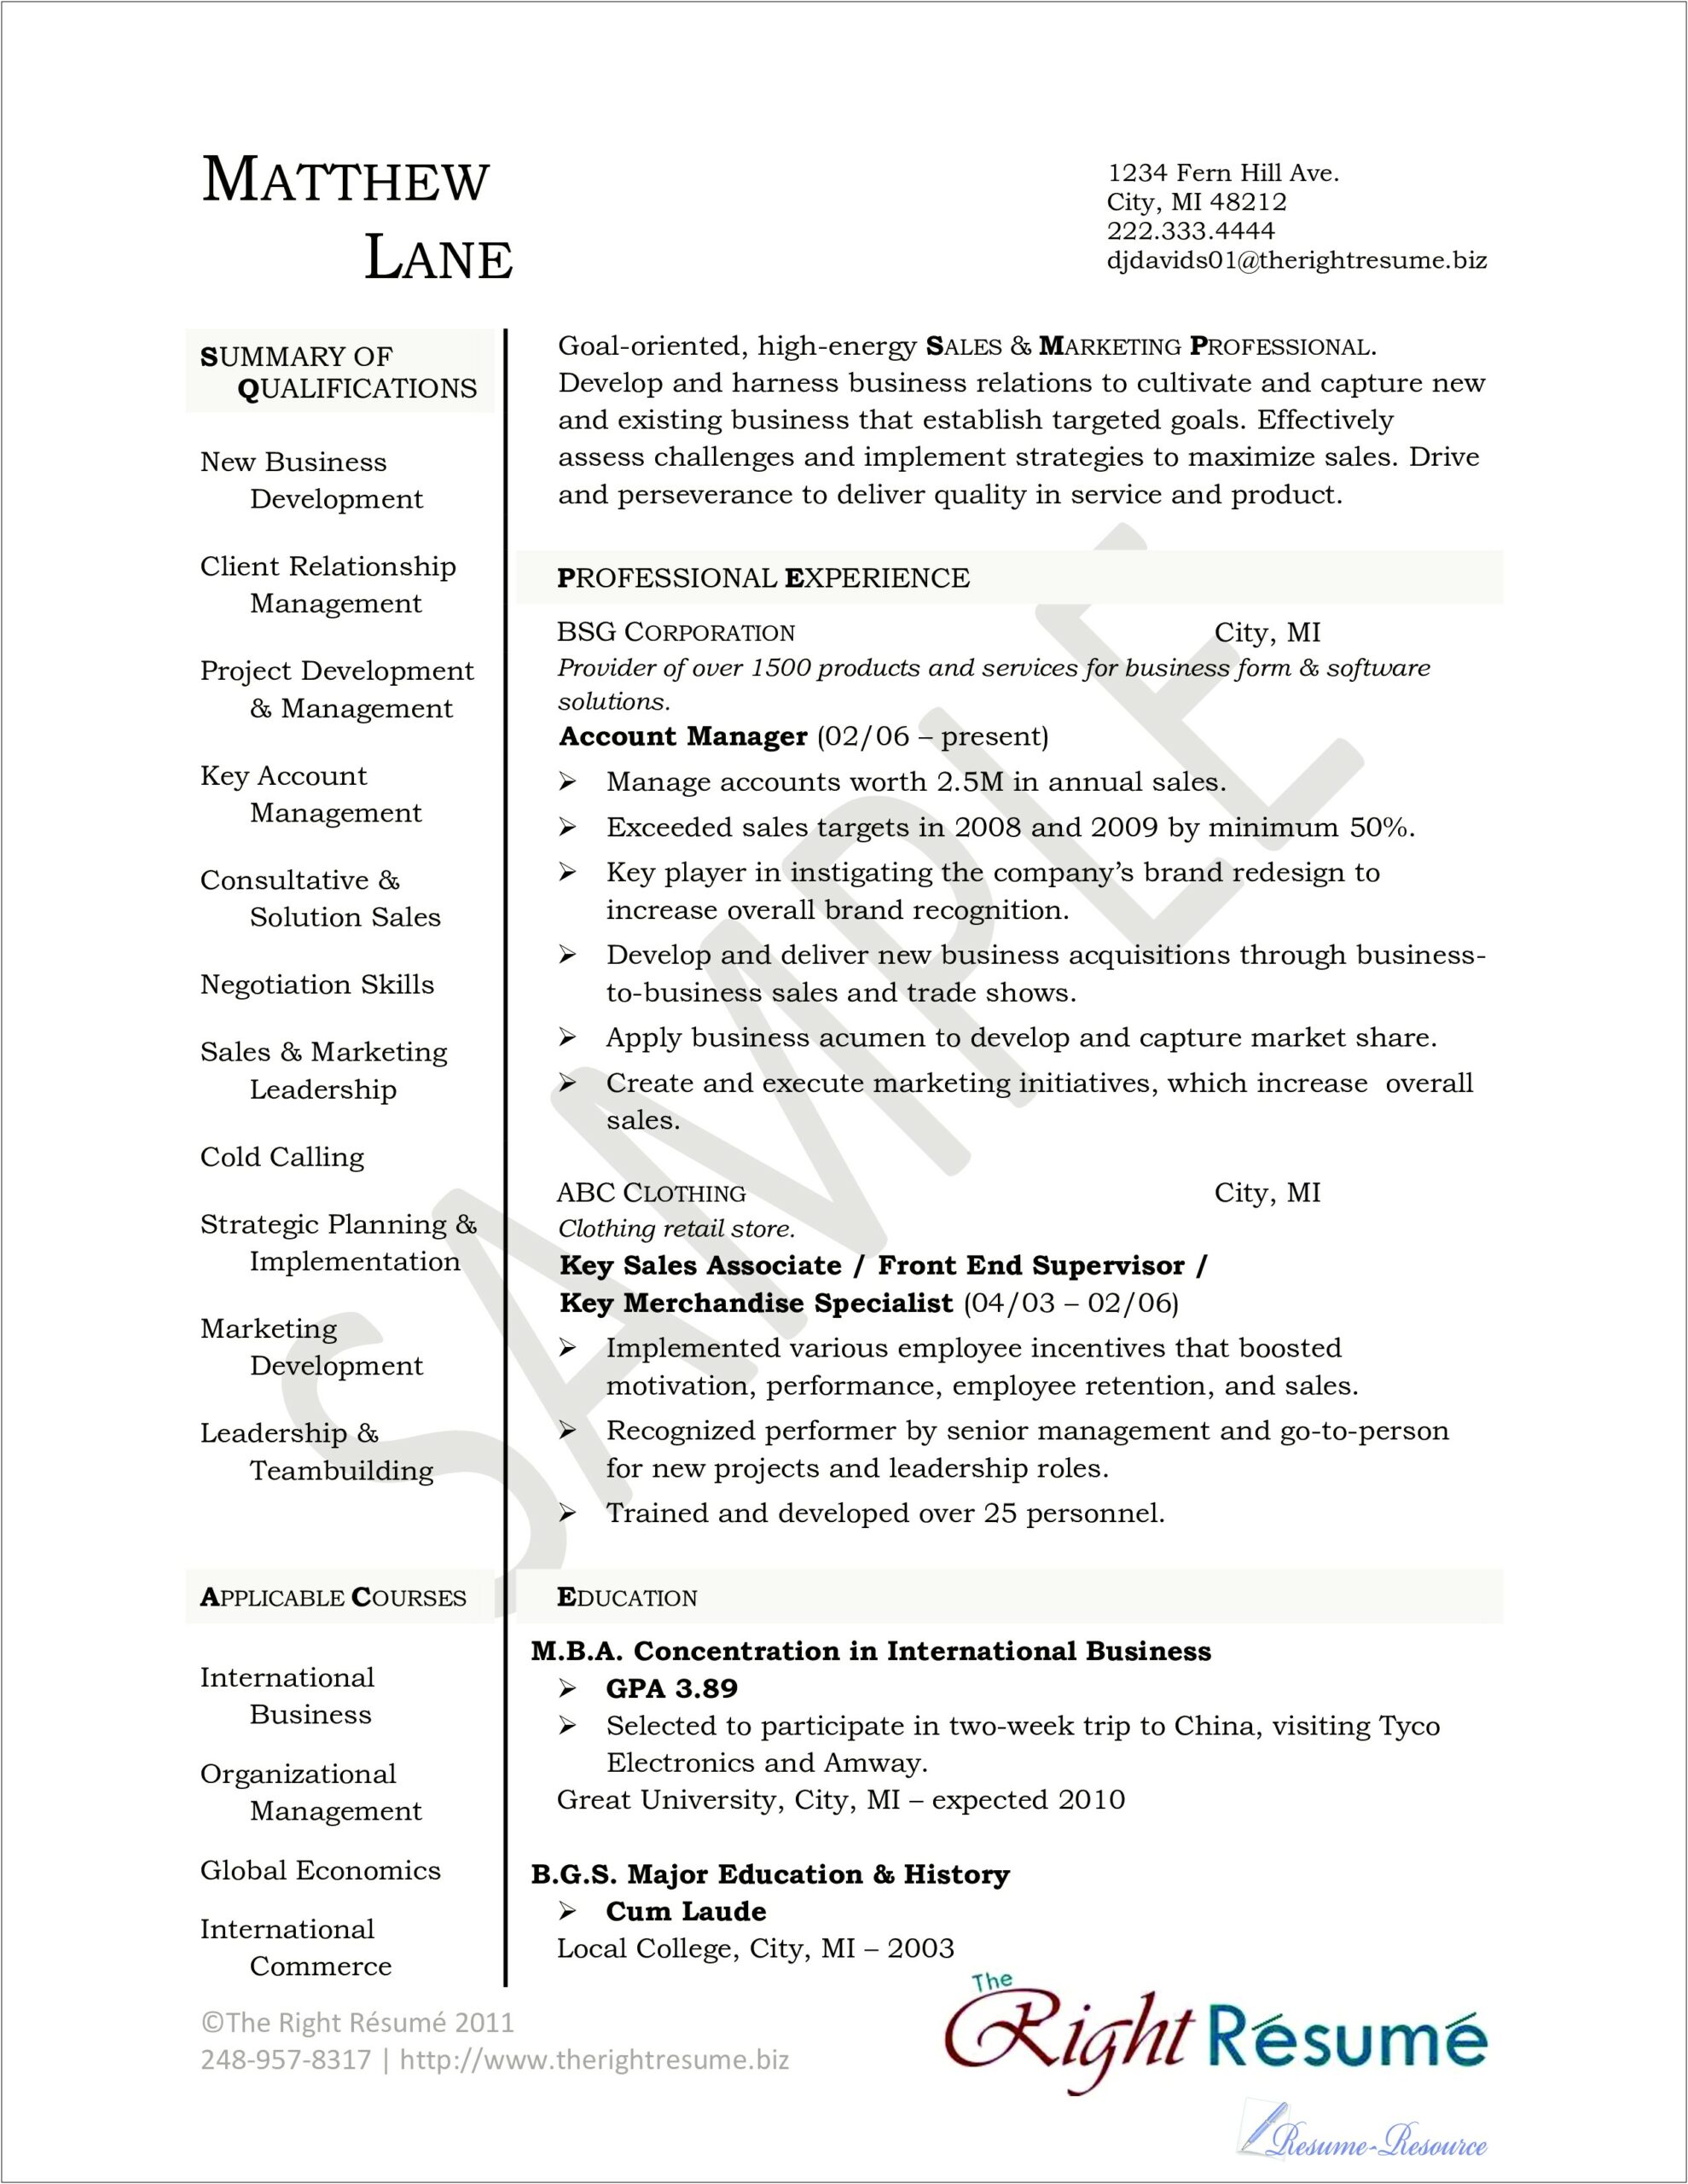 Director Of Account Management Resume